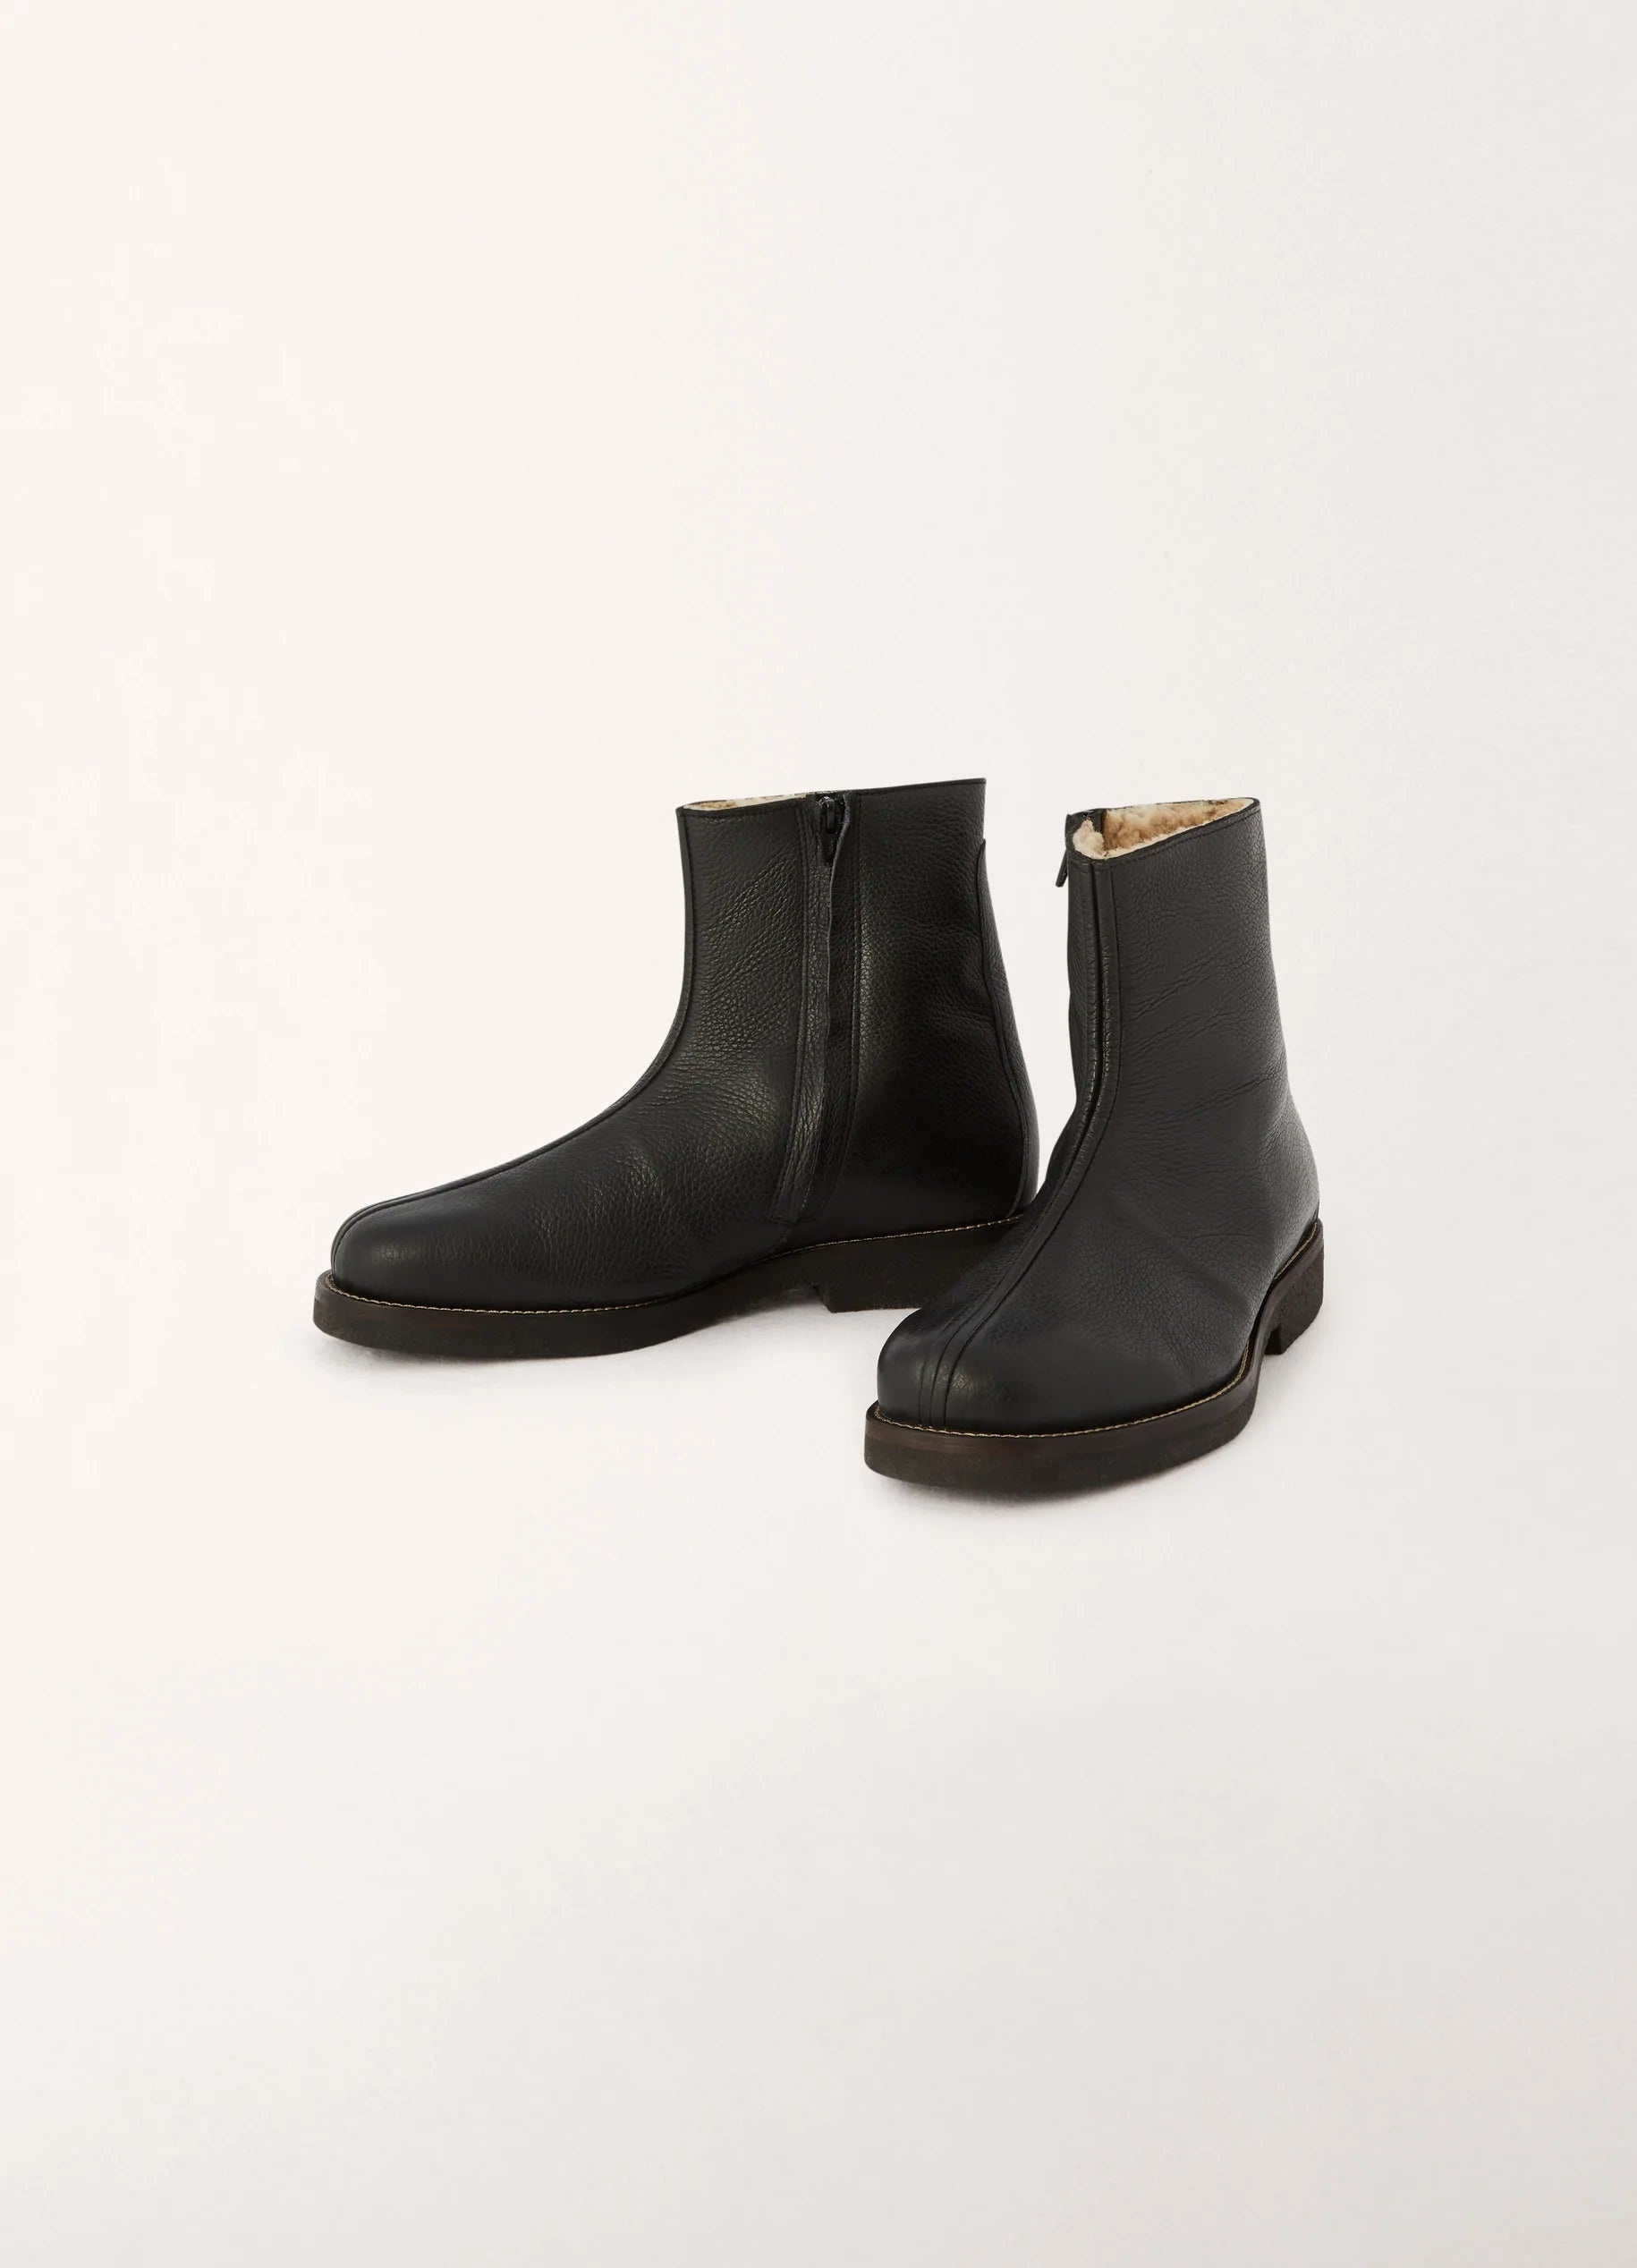 Lemaire BOOTS WITH SHEARLING GRAINE CALF LTH | REVERSIBLE